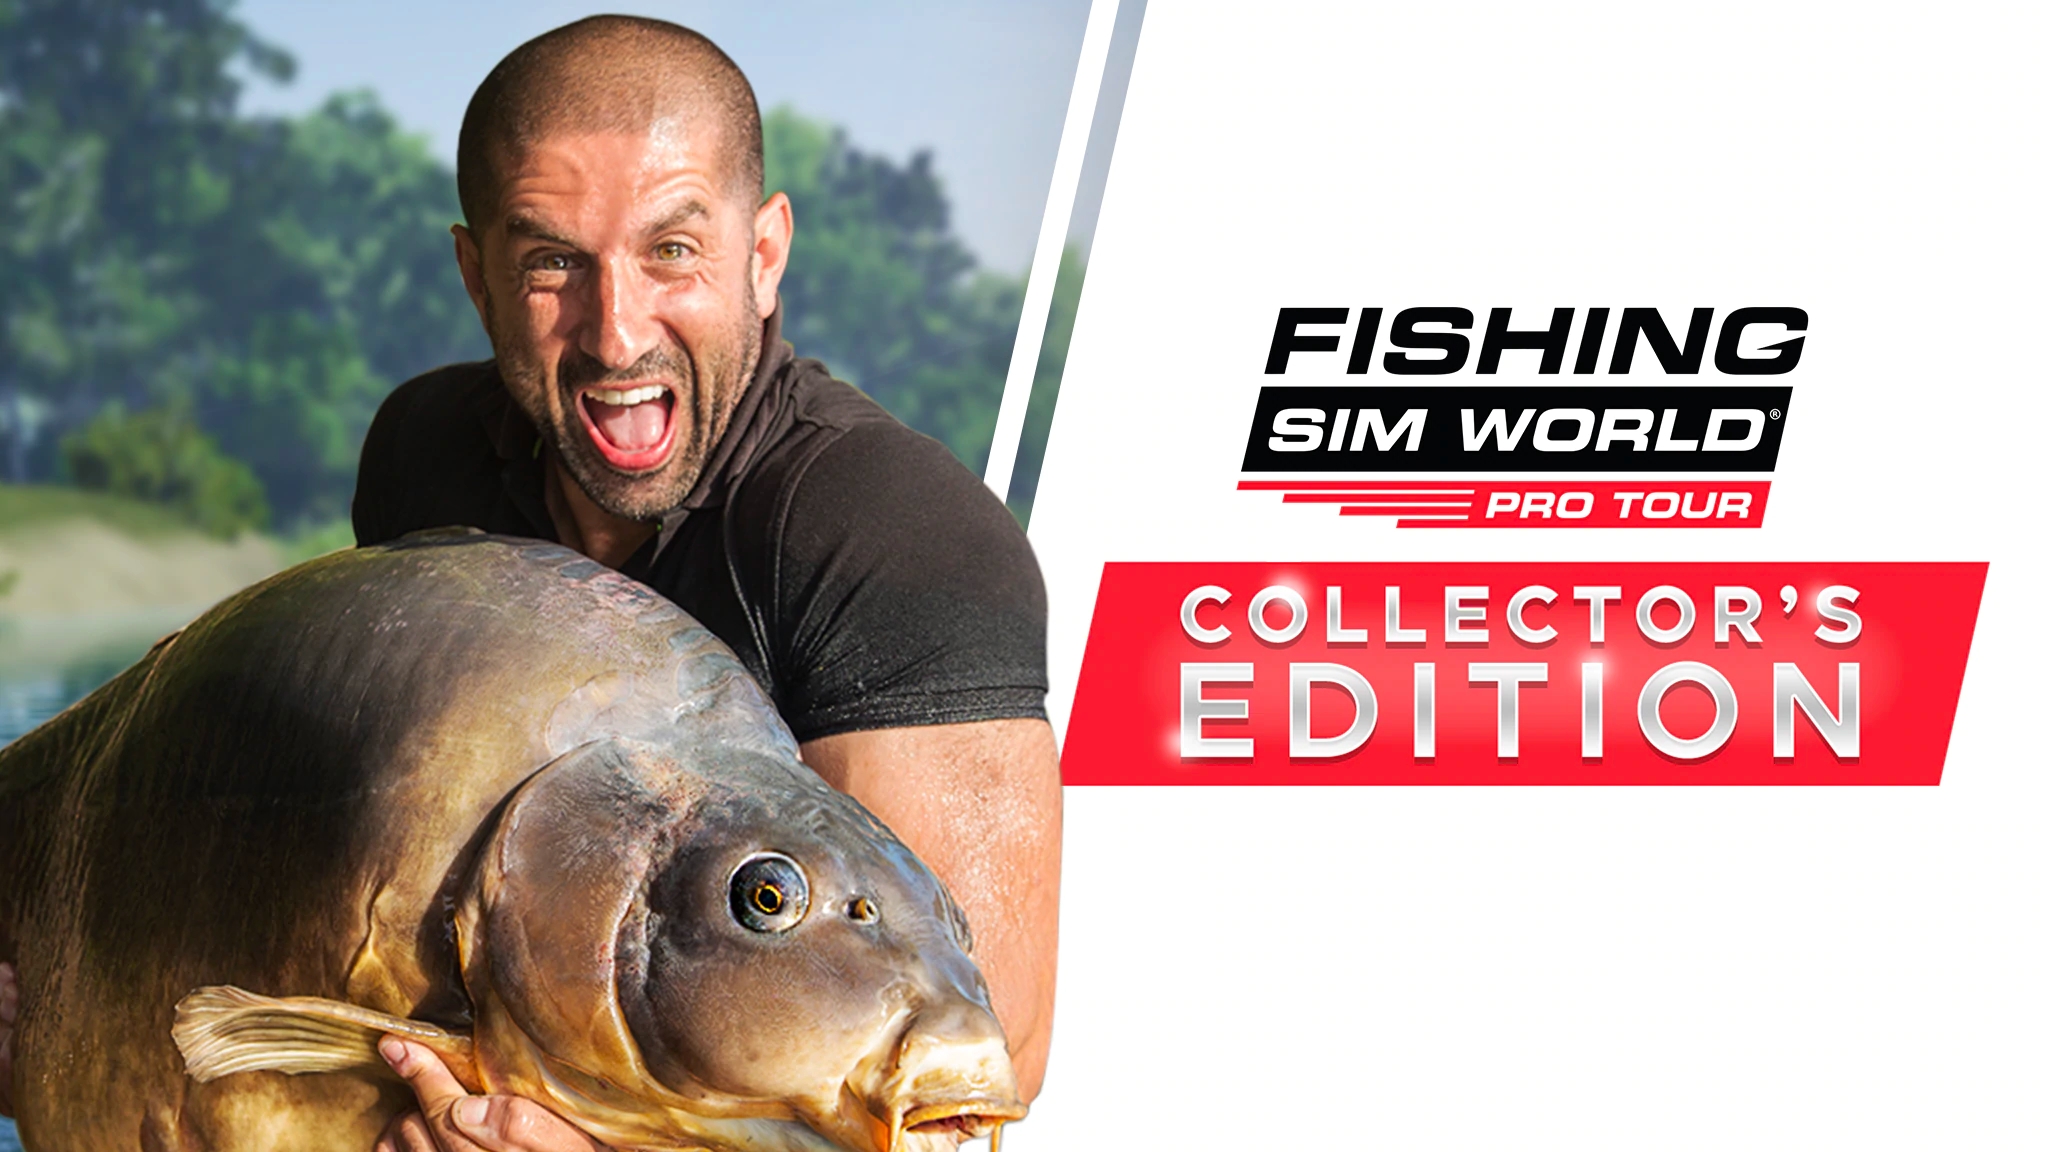 https://gaming-cdn.com/images/products/6541/orig/fishing-sim-world-2020-pro-tour-collector-s-edition-collector-s-edition-pc-game-steam-cover.jpg?v=1708618548